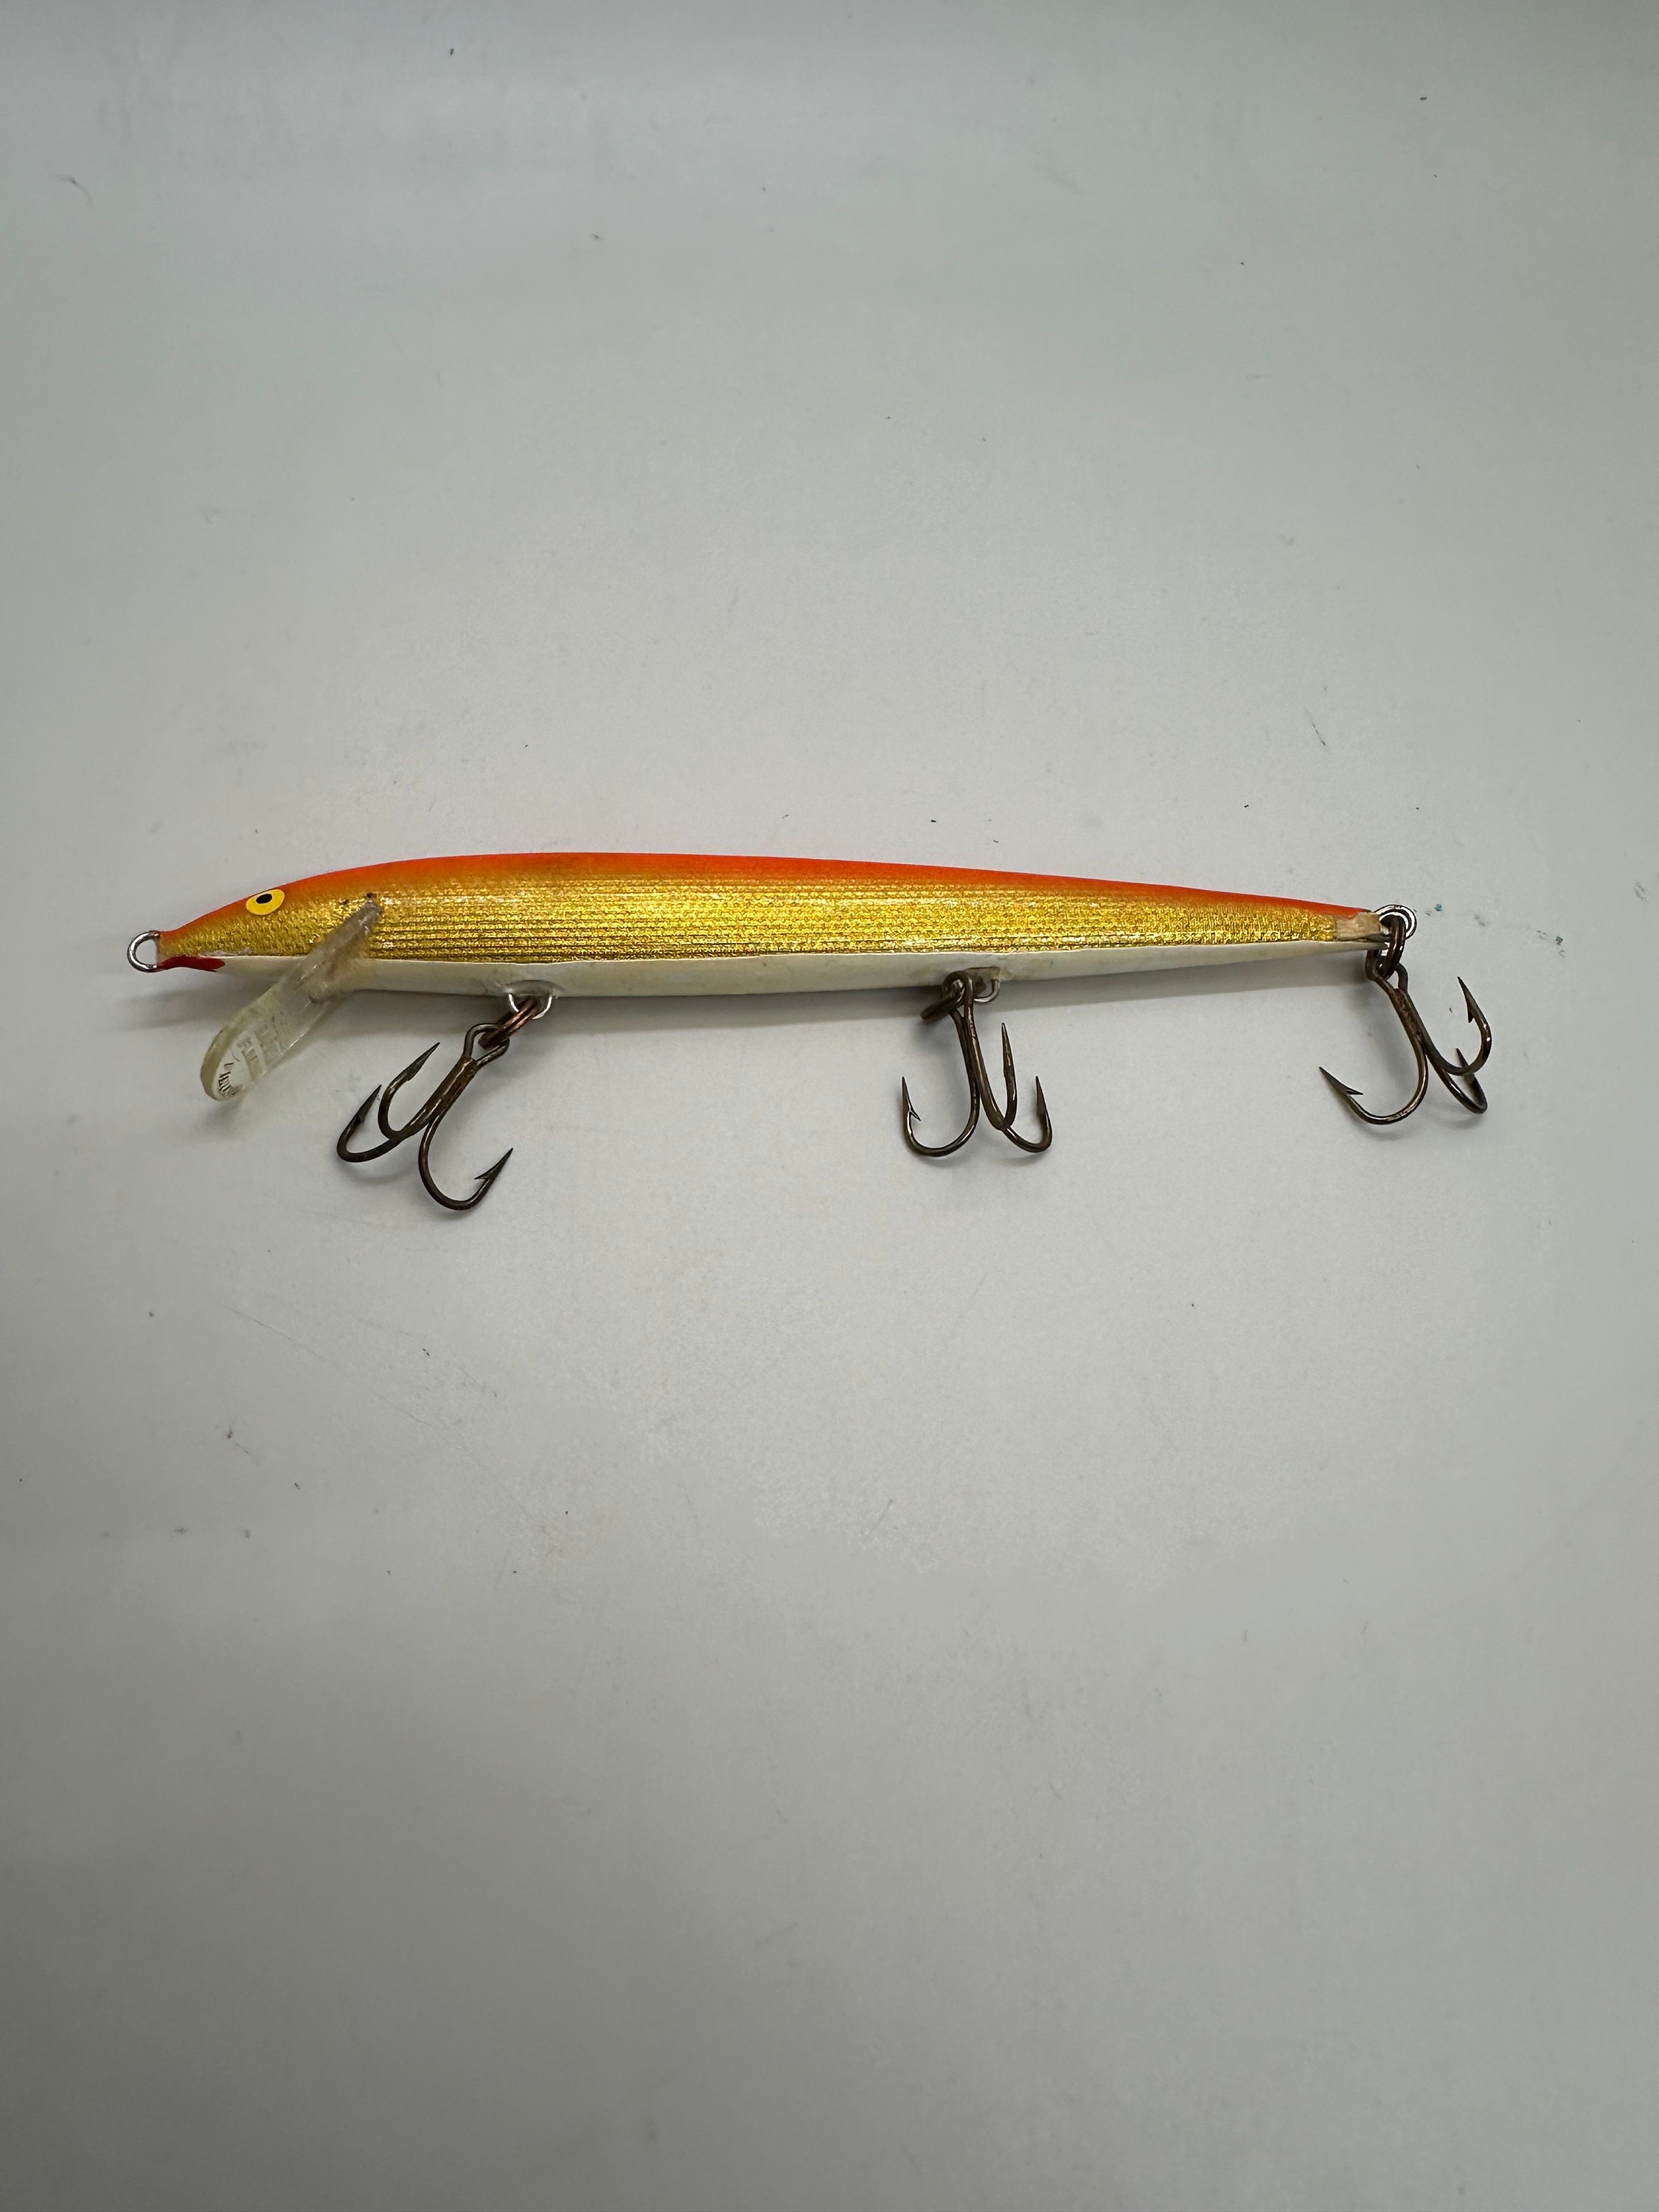 VINTAGE RAPALA ORIGINAL FLOATING FISHING LURE 5 INCHES PRE-OWNED ESTATE